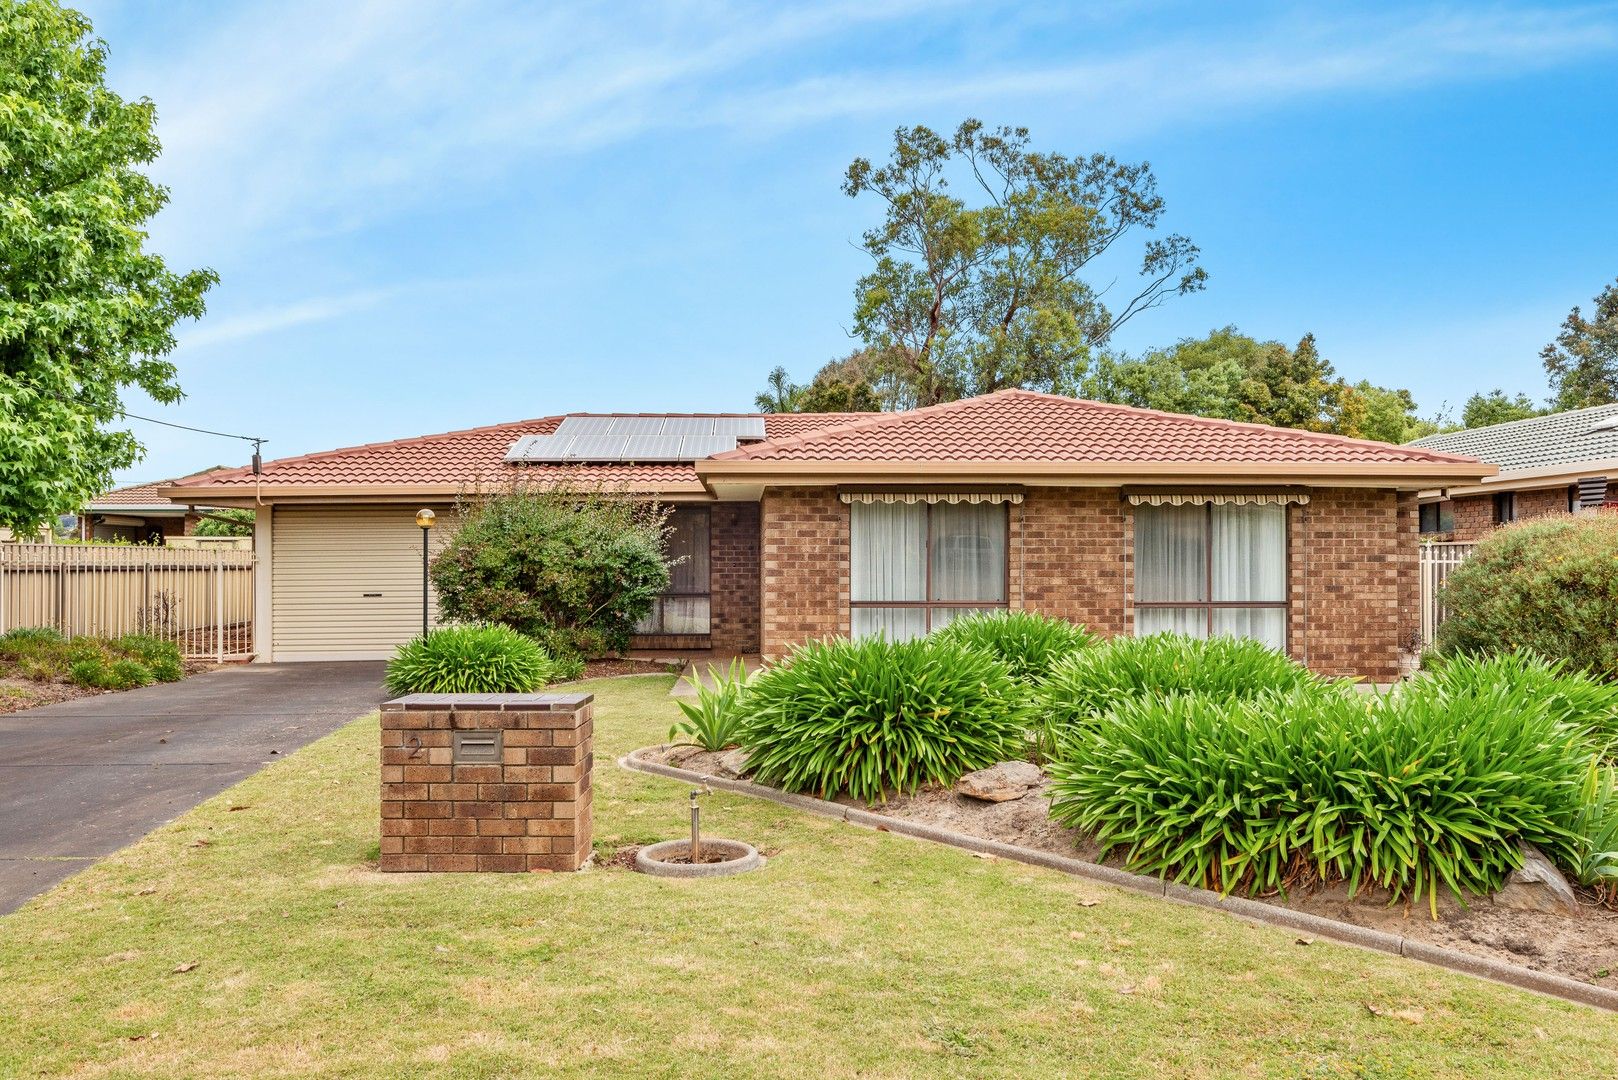 3 bedrooms House in 2 Acasta Court FLAGSTAFF HILL SA, 5159